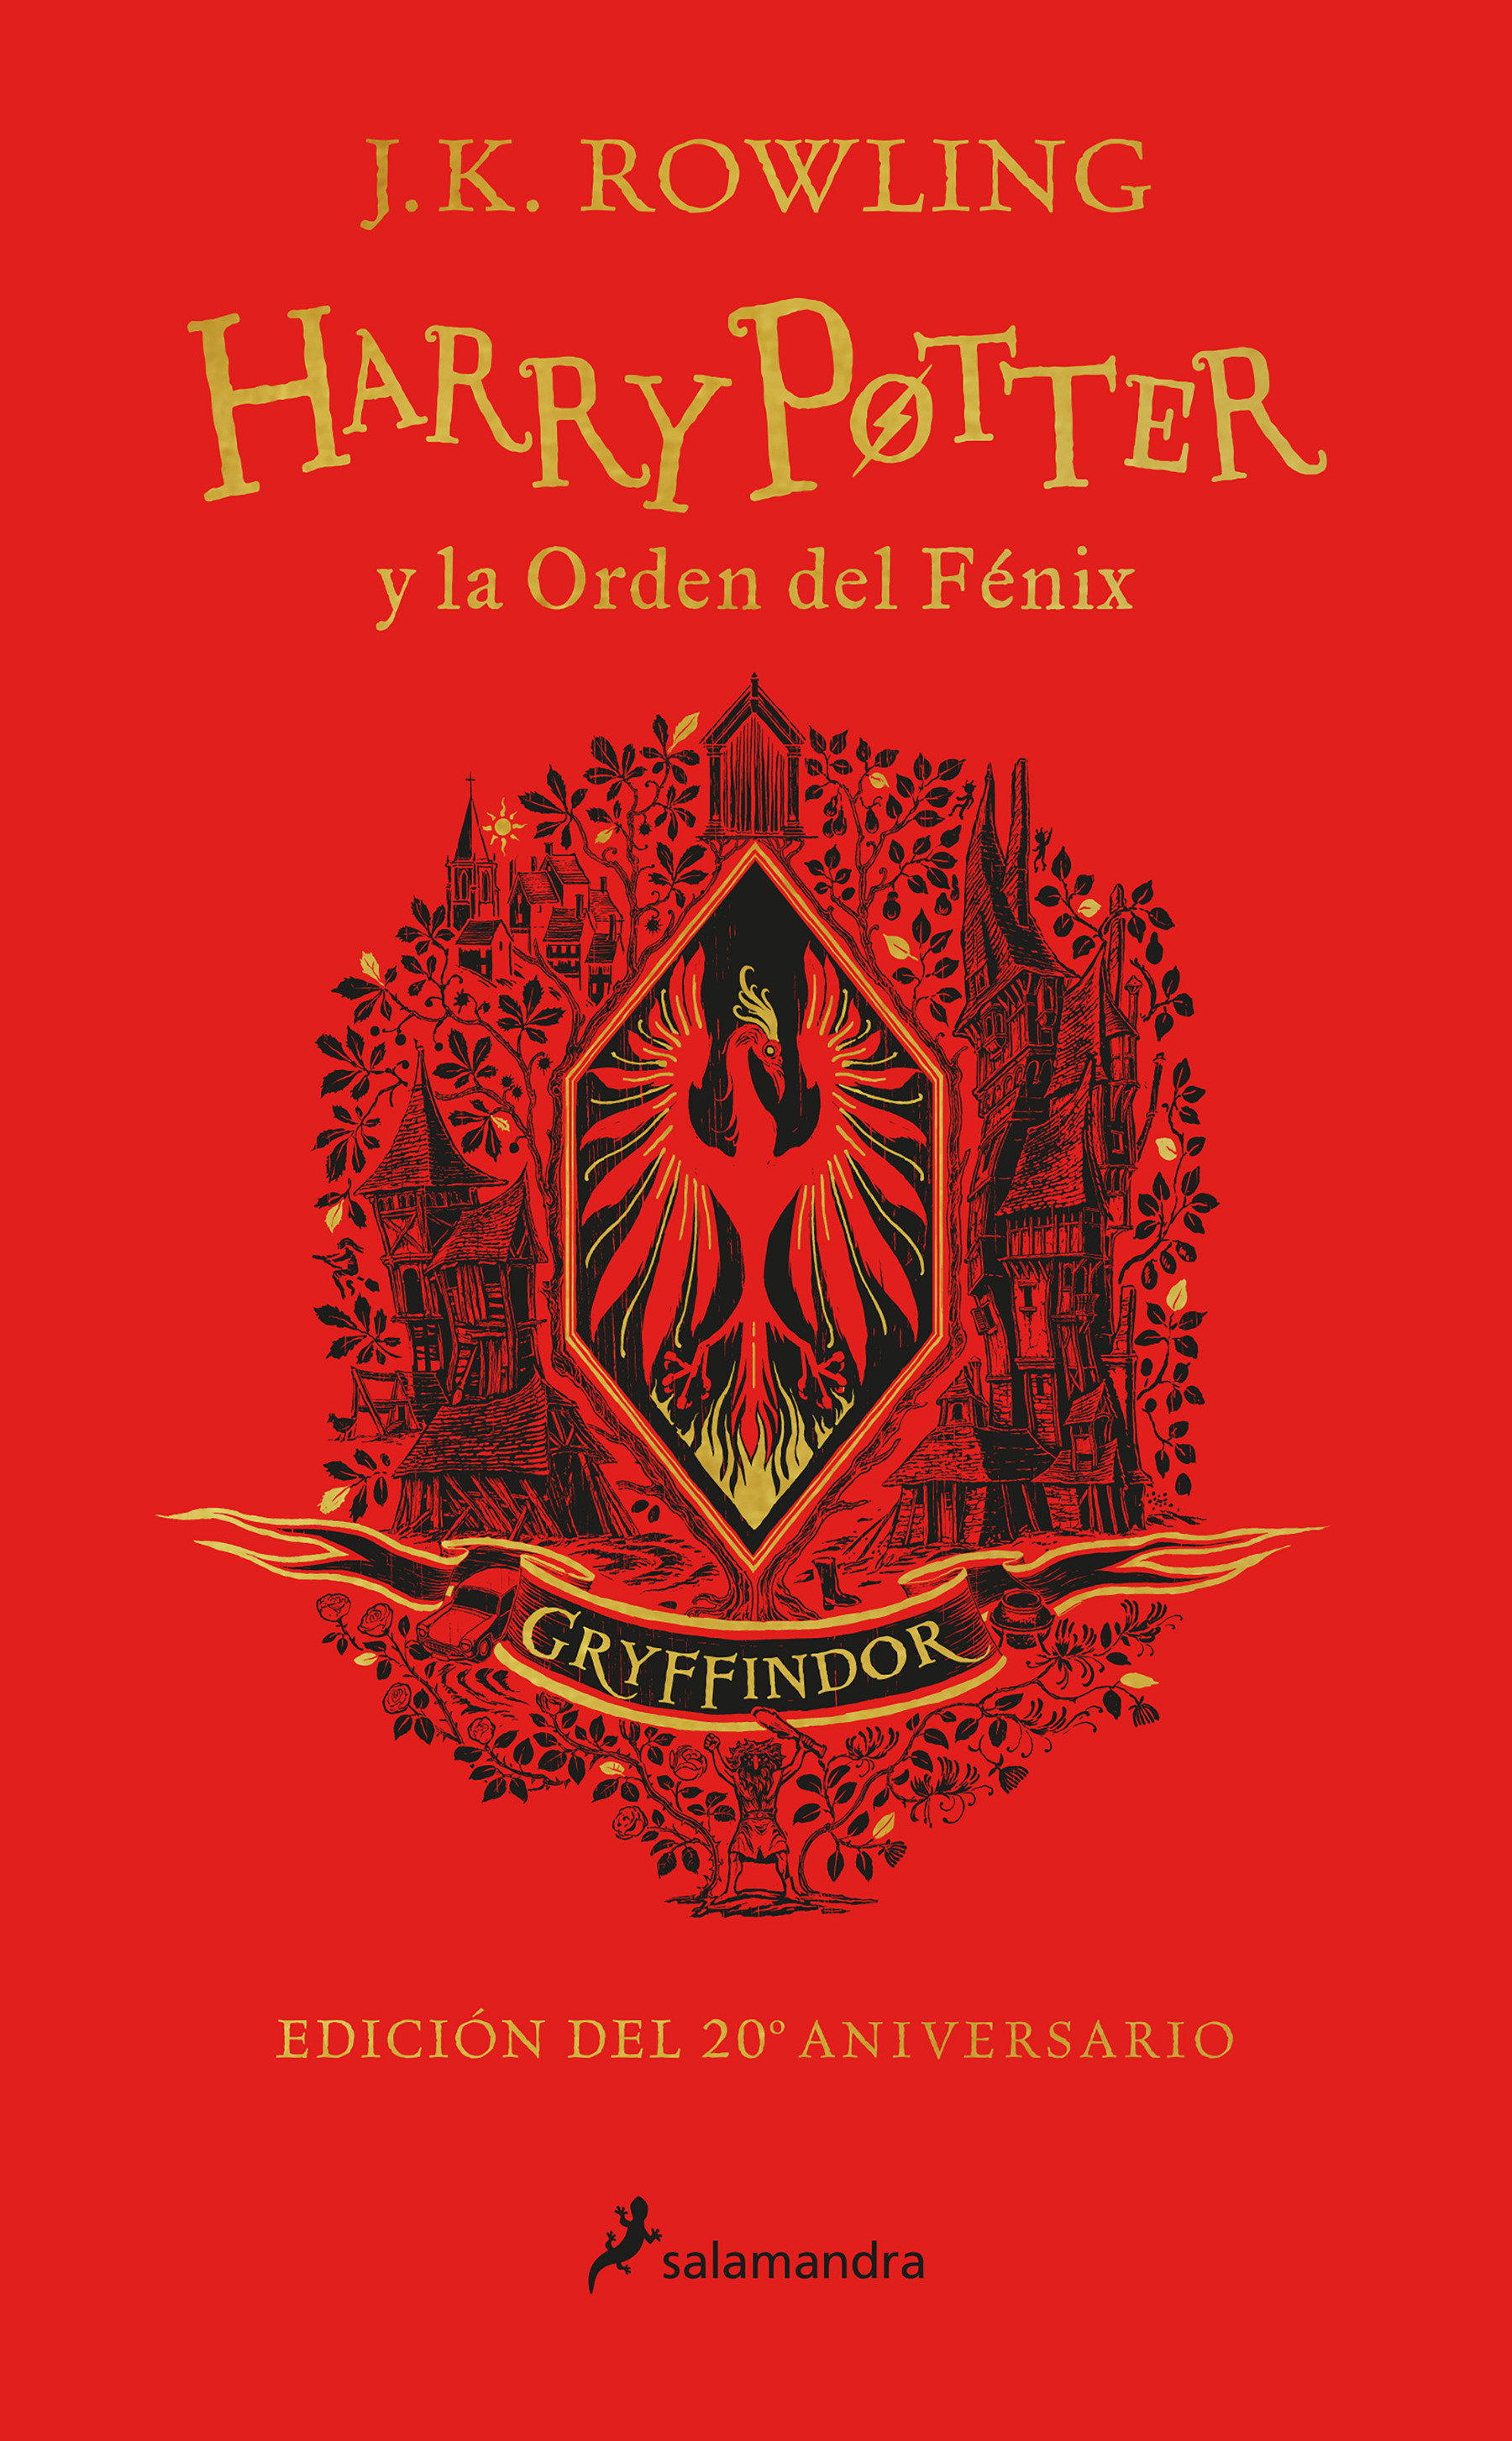 Harry Potter Y La Orden Del Fénix (20 Aniv. Gryffindor) / Harry Potter and the O Rder Of The Phoenix (Gryffindor) (Hardcover Book)